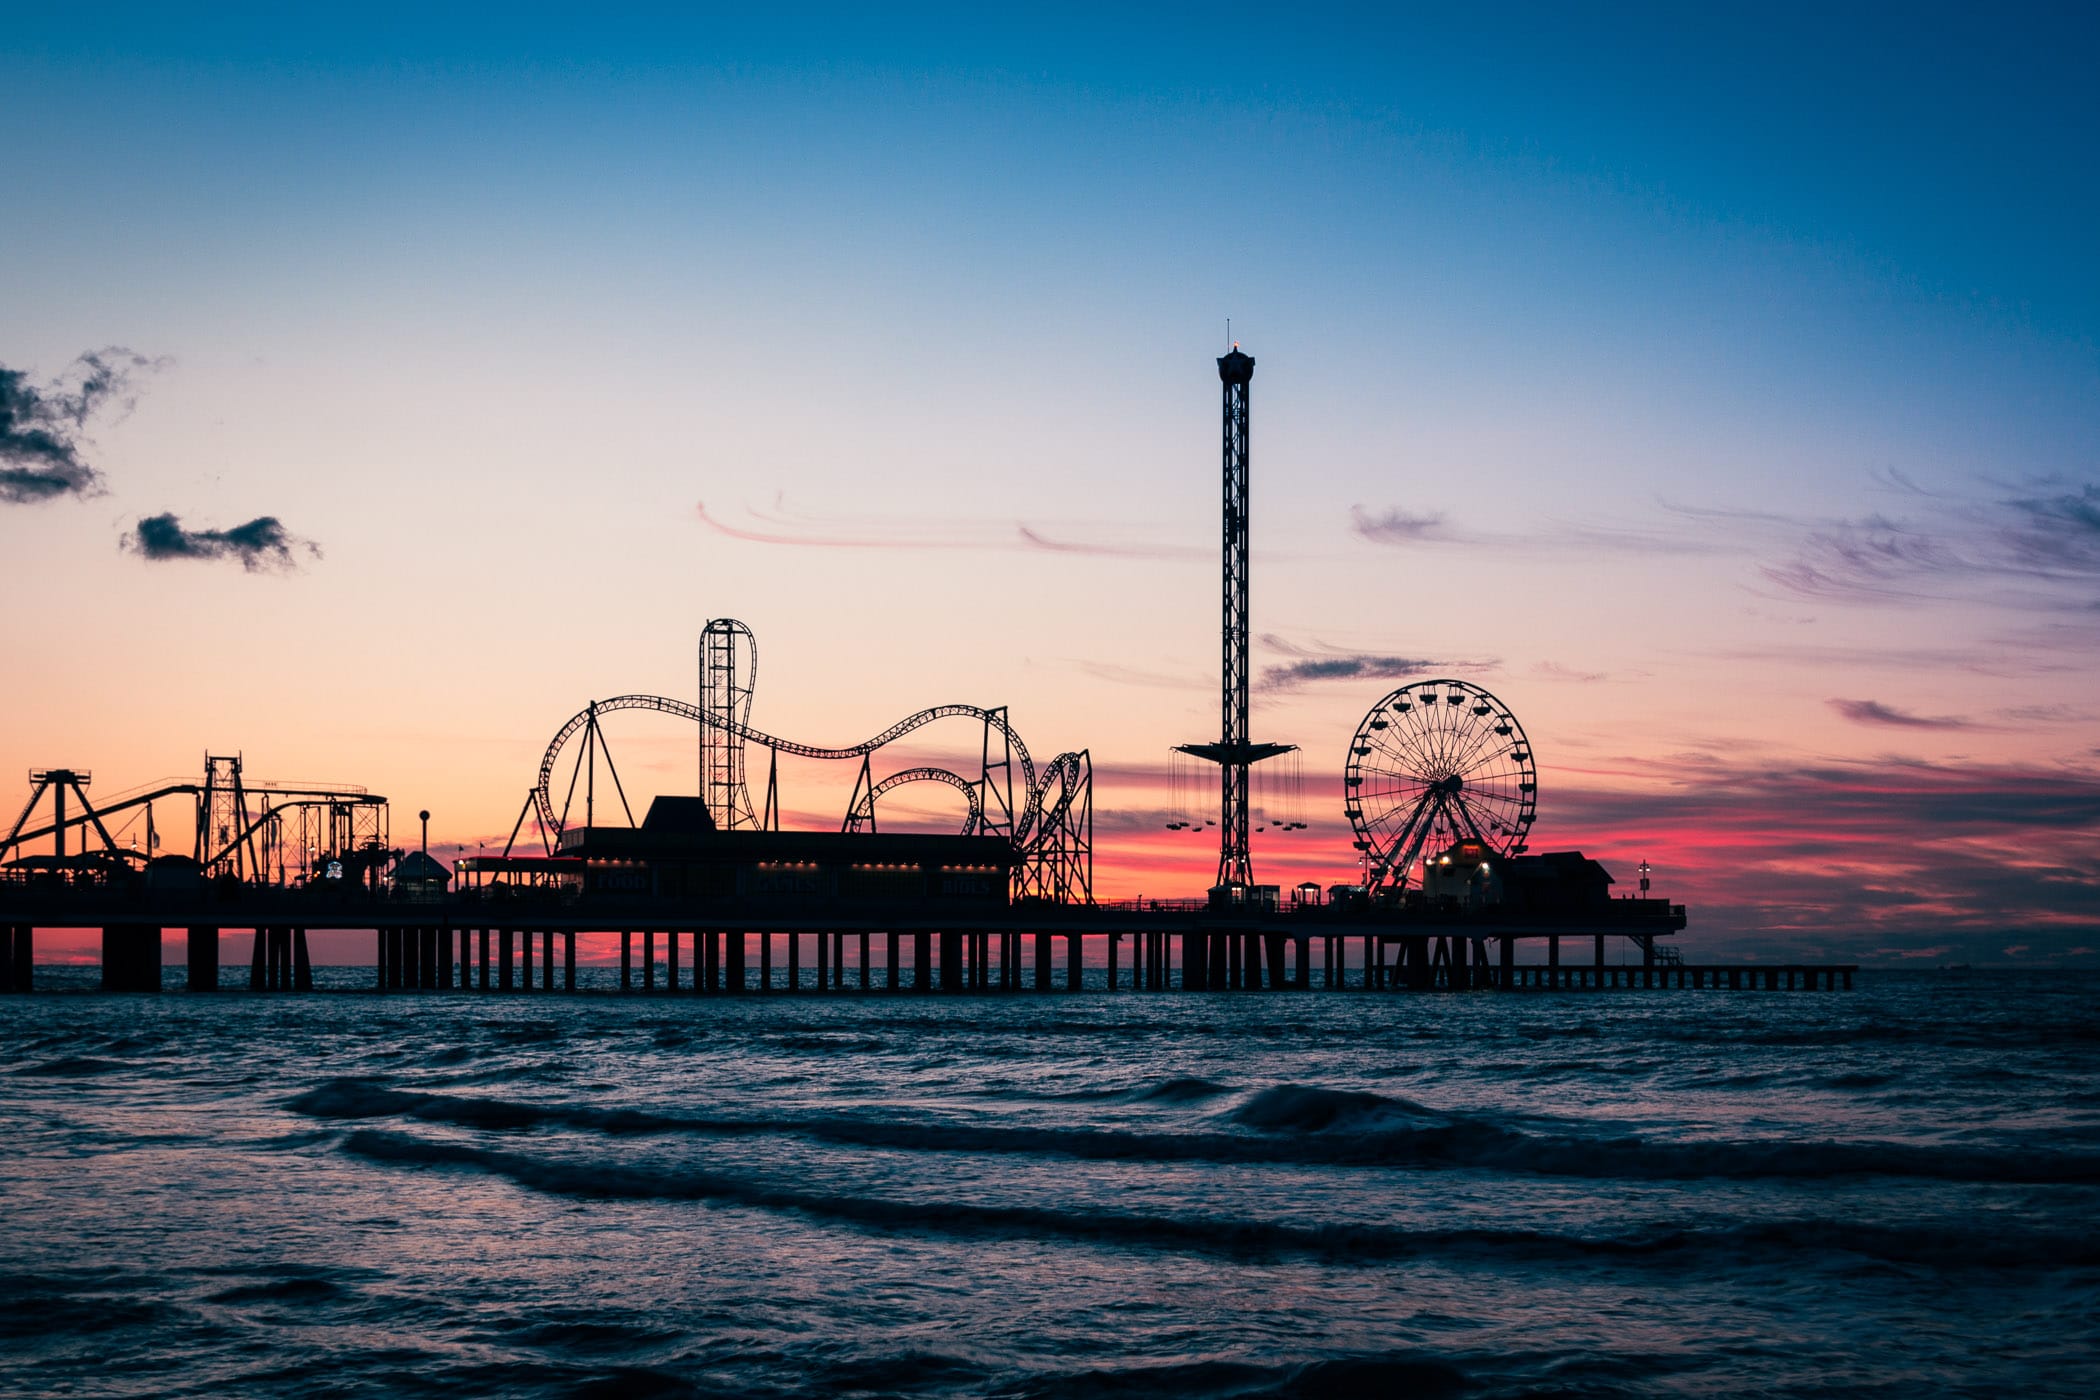 The Galveston Island Historic Pleasure Pier is silhouetted by the sunrise over the Gulf of Mexico.